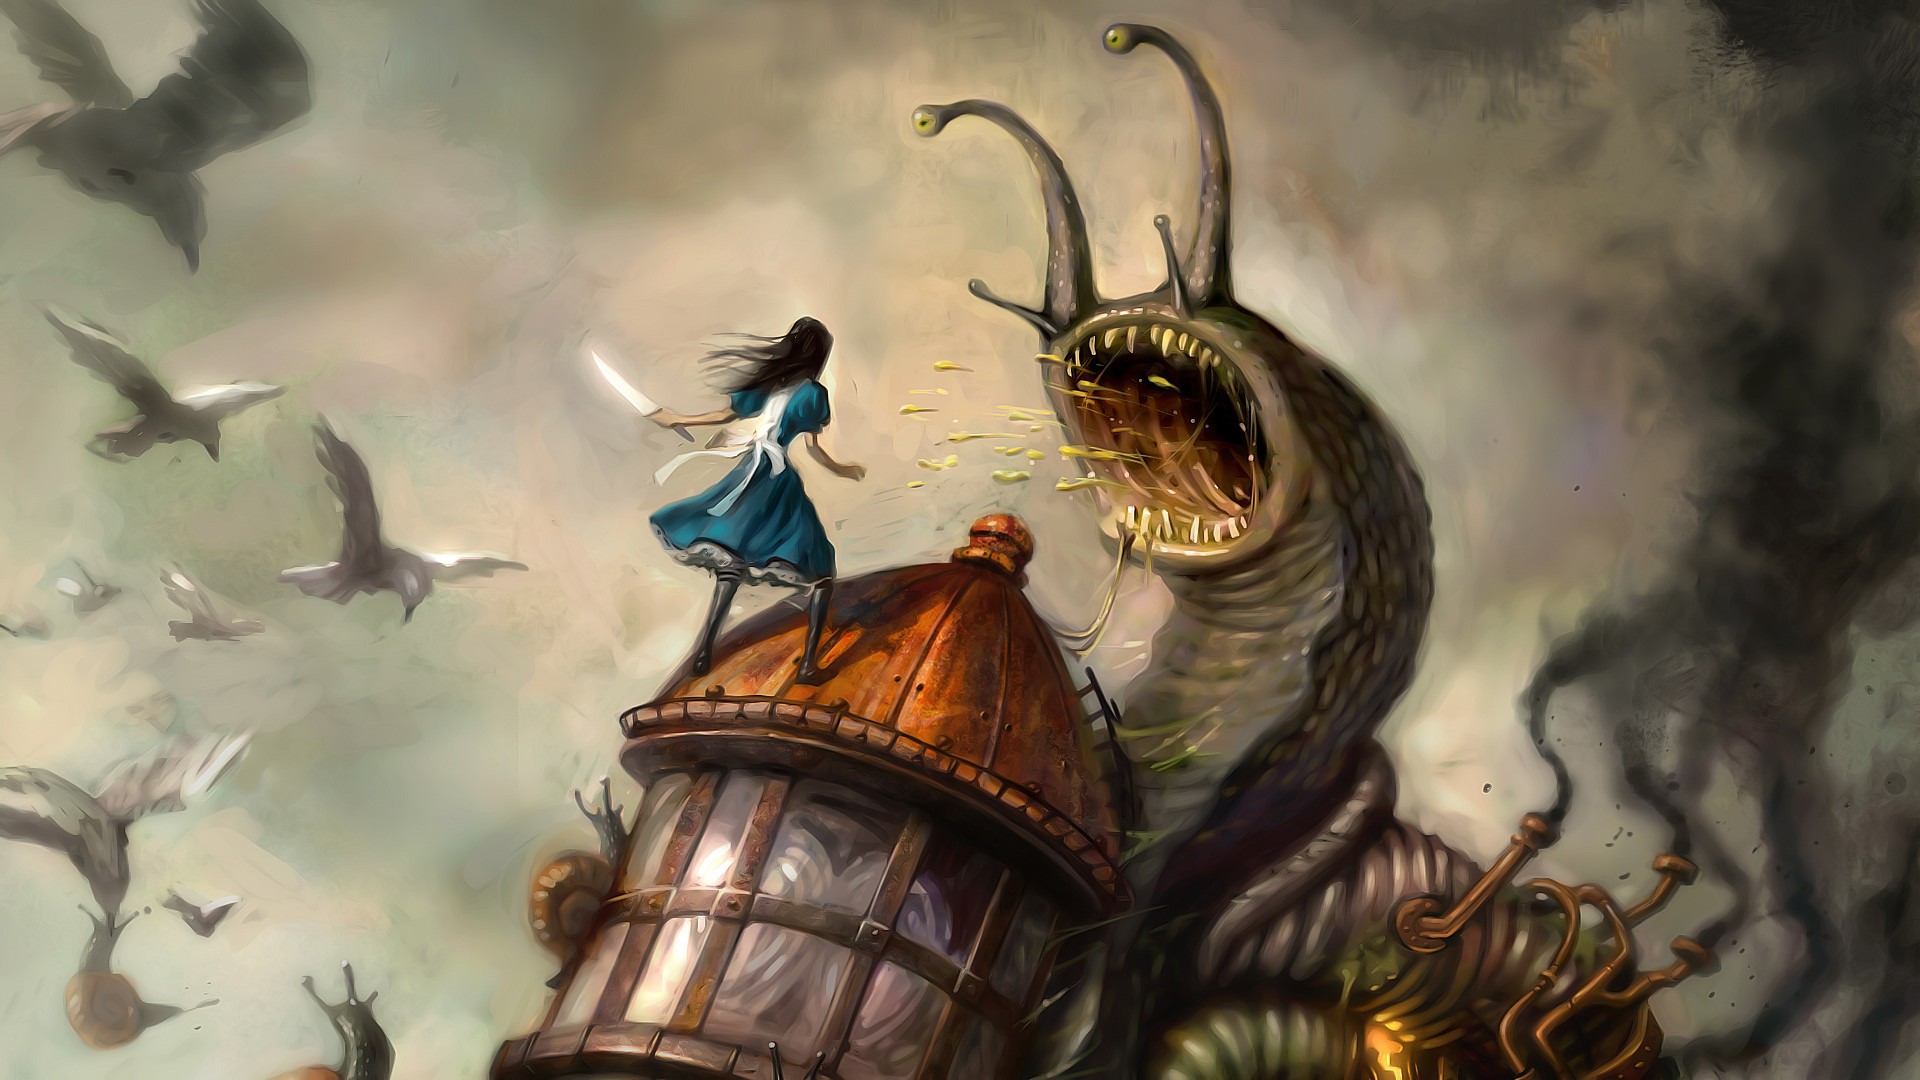 General 1920x1080 video games artwork Alice: Madness Returns video game girls fantasy art creature video game characters video game art birds knife blue dress